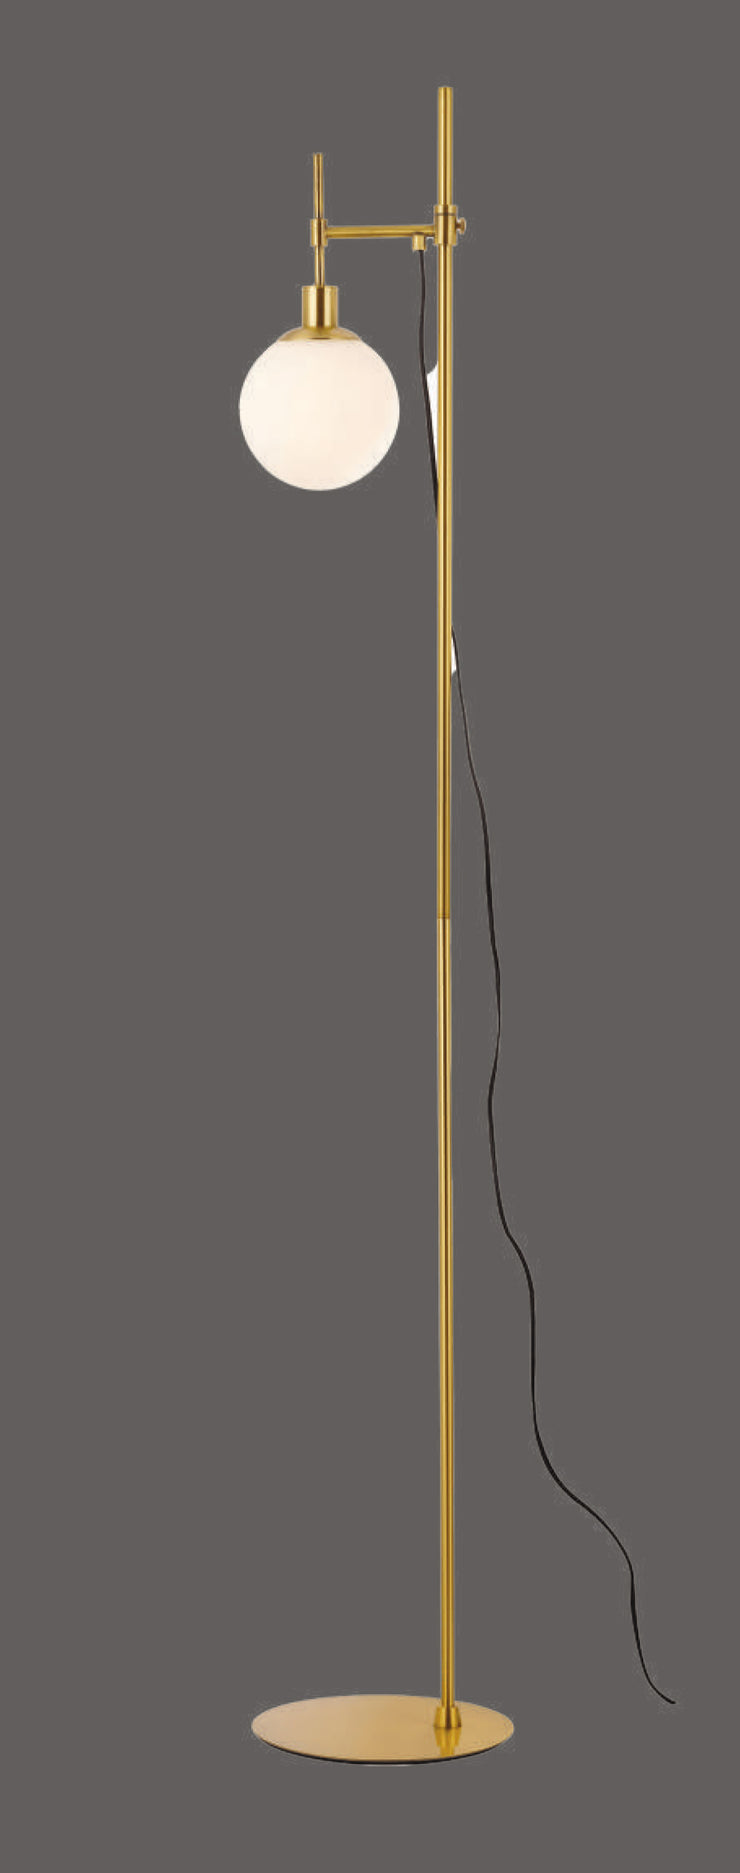 GOLDEN FINISH CONTEMPORARY FLOOR LAMP WITH A METAL STAND